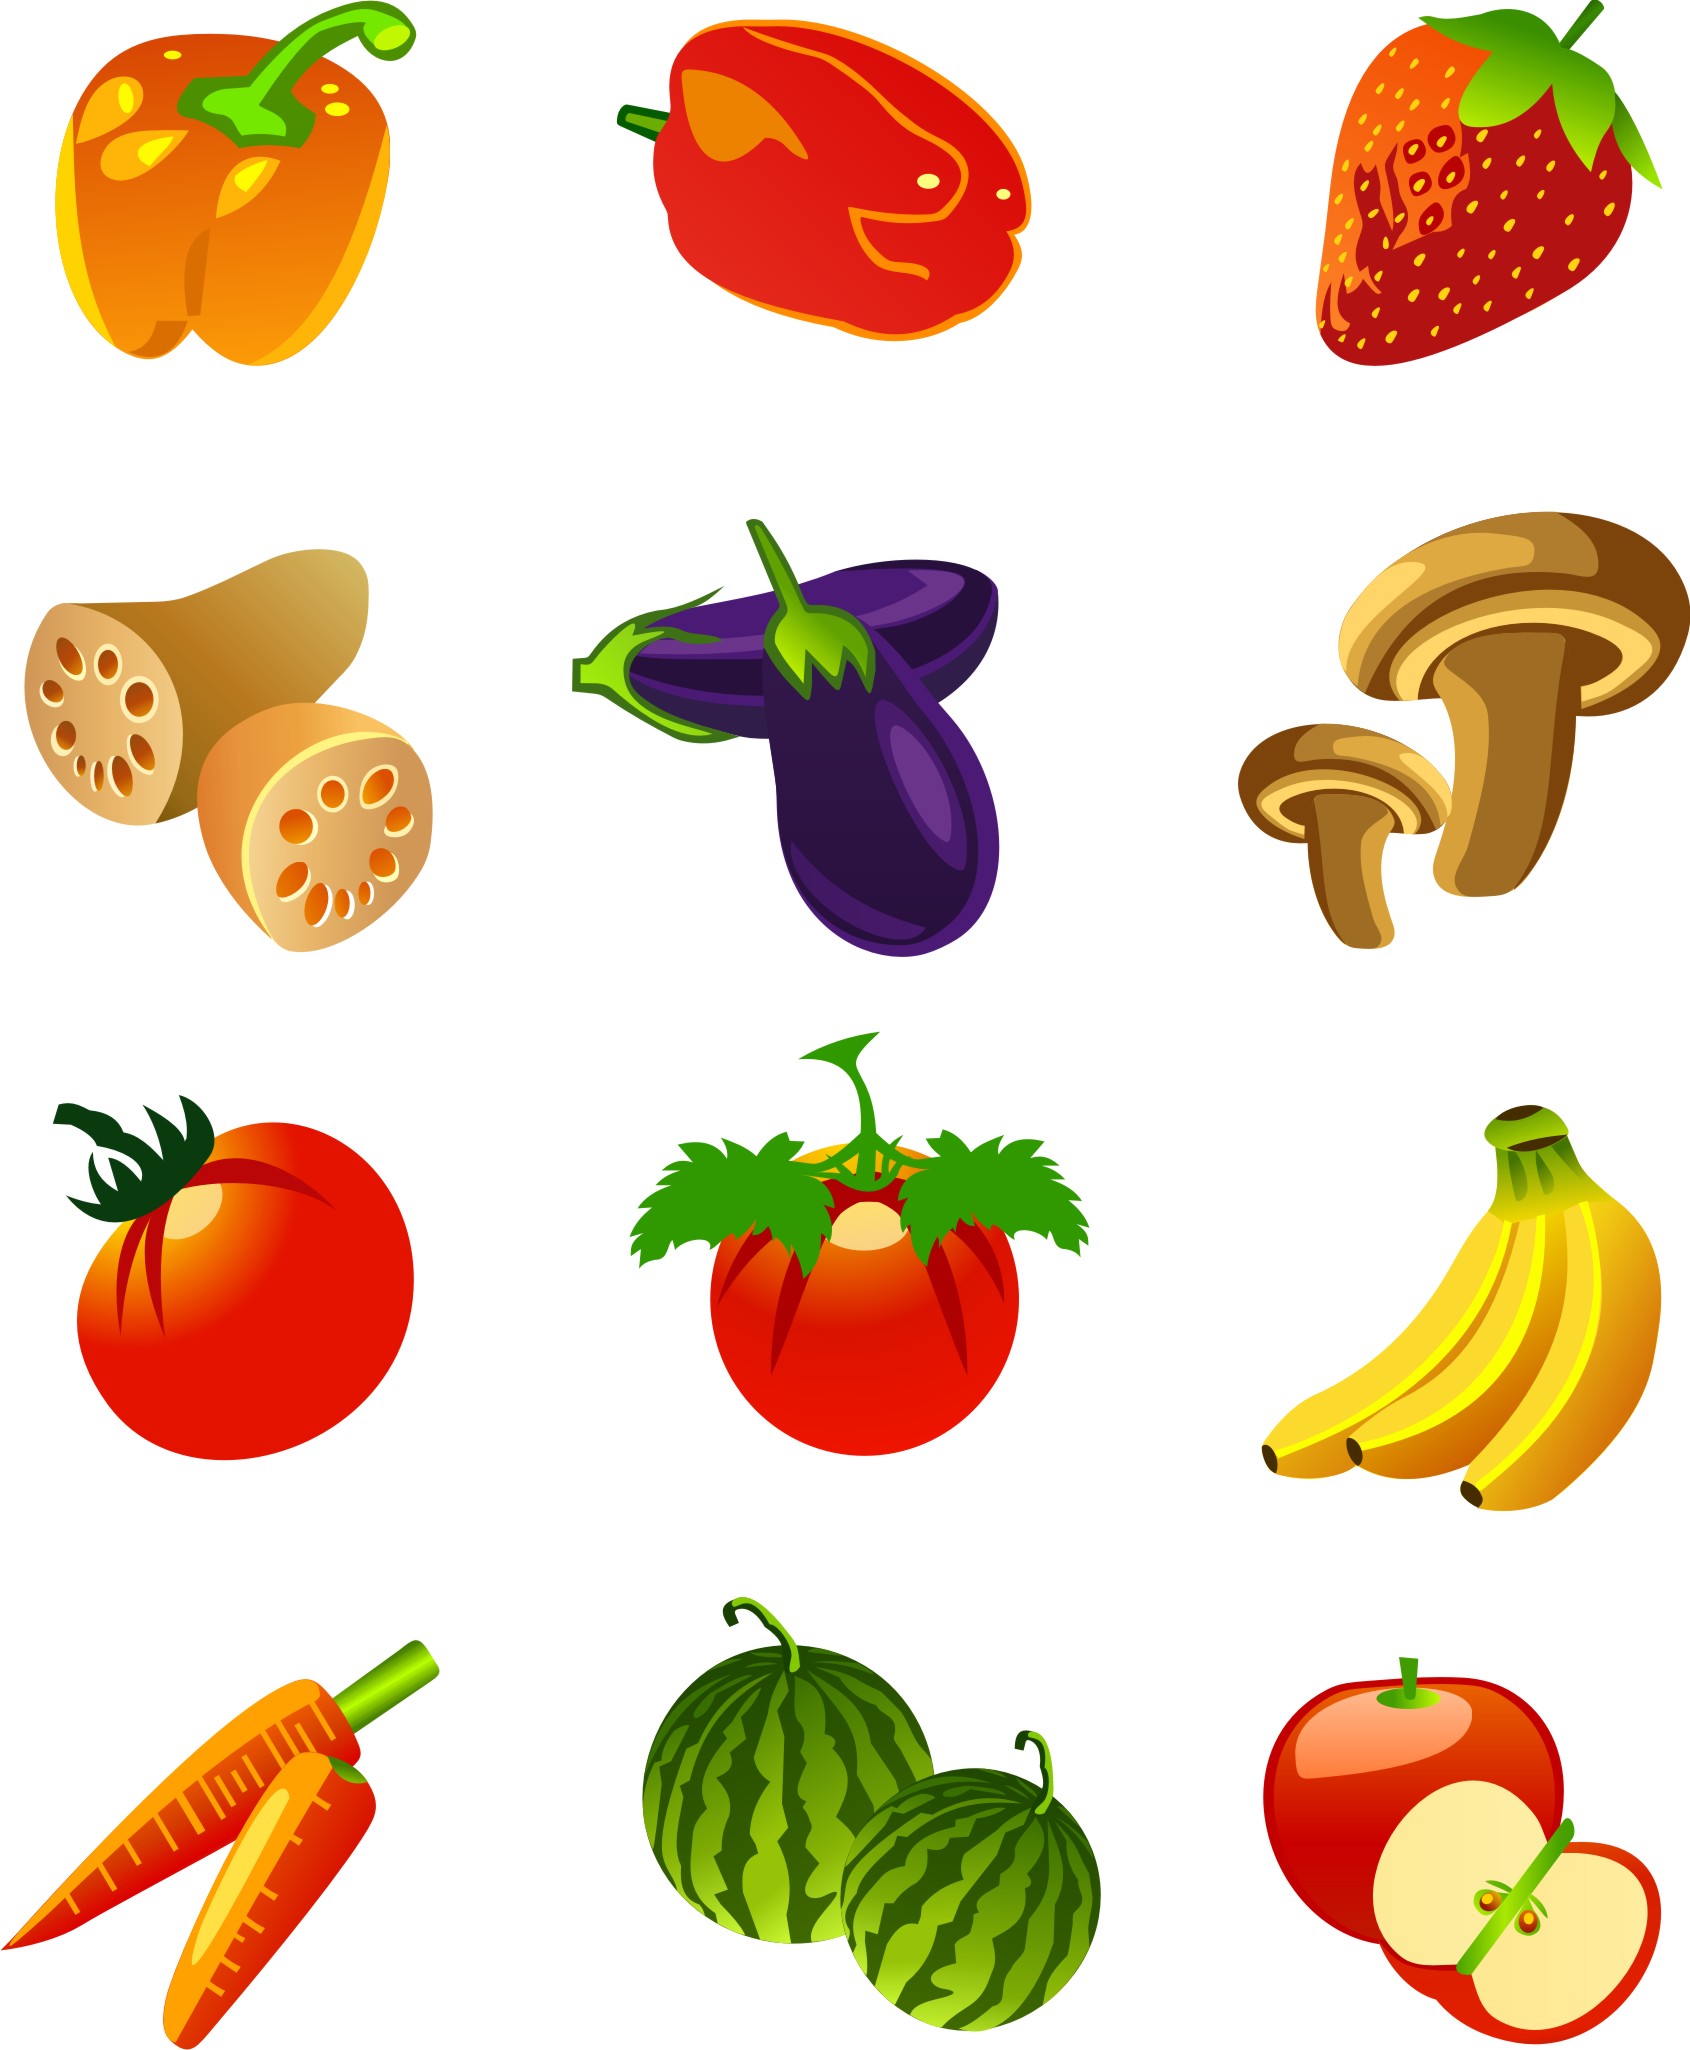 Fruits and vegetables motor flower icon vector Free Vector / 4Vector